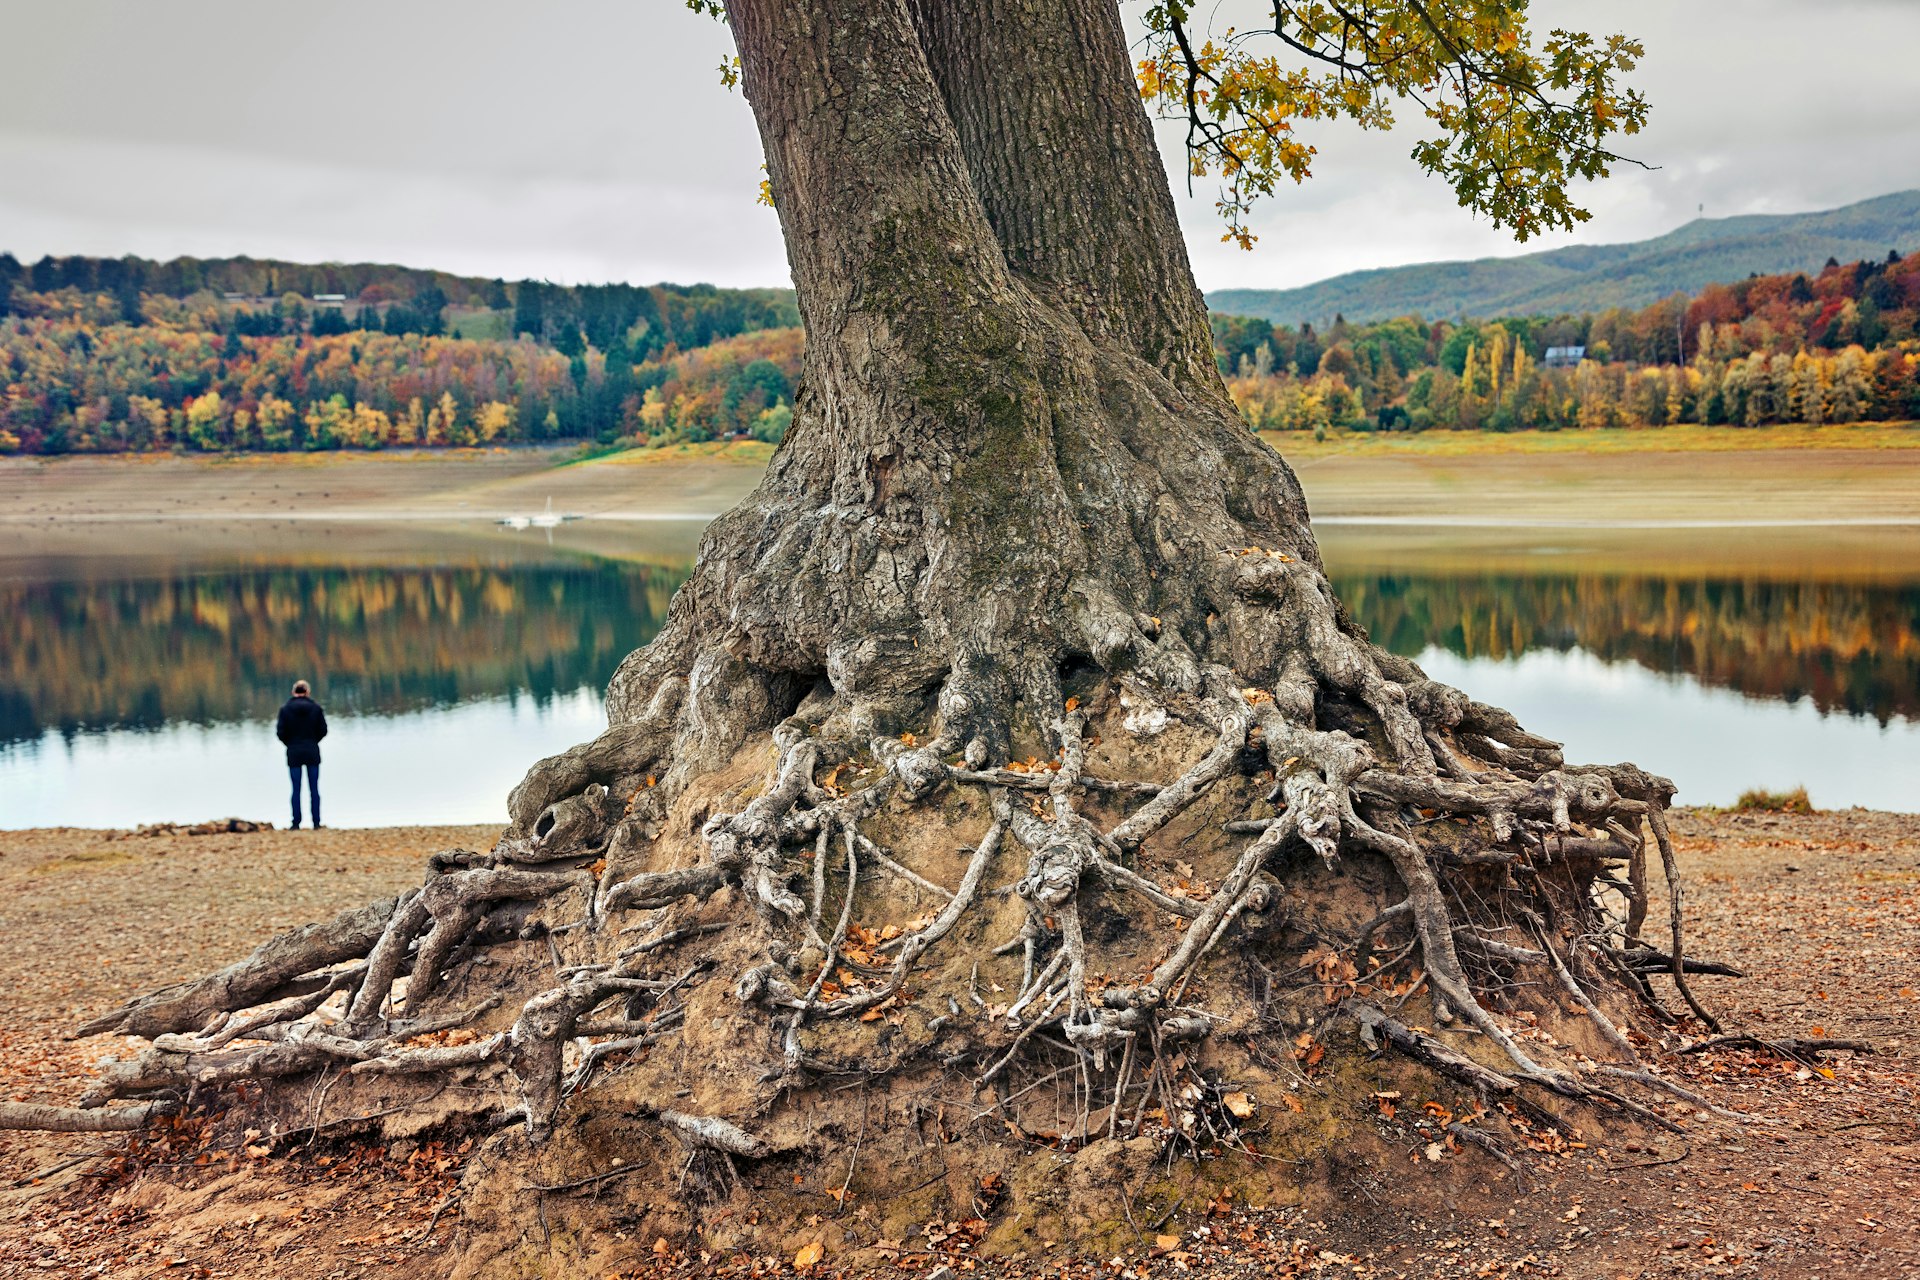 Old tree and roots at Edersee lake, Kellerwald forest in the background